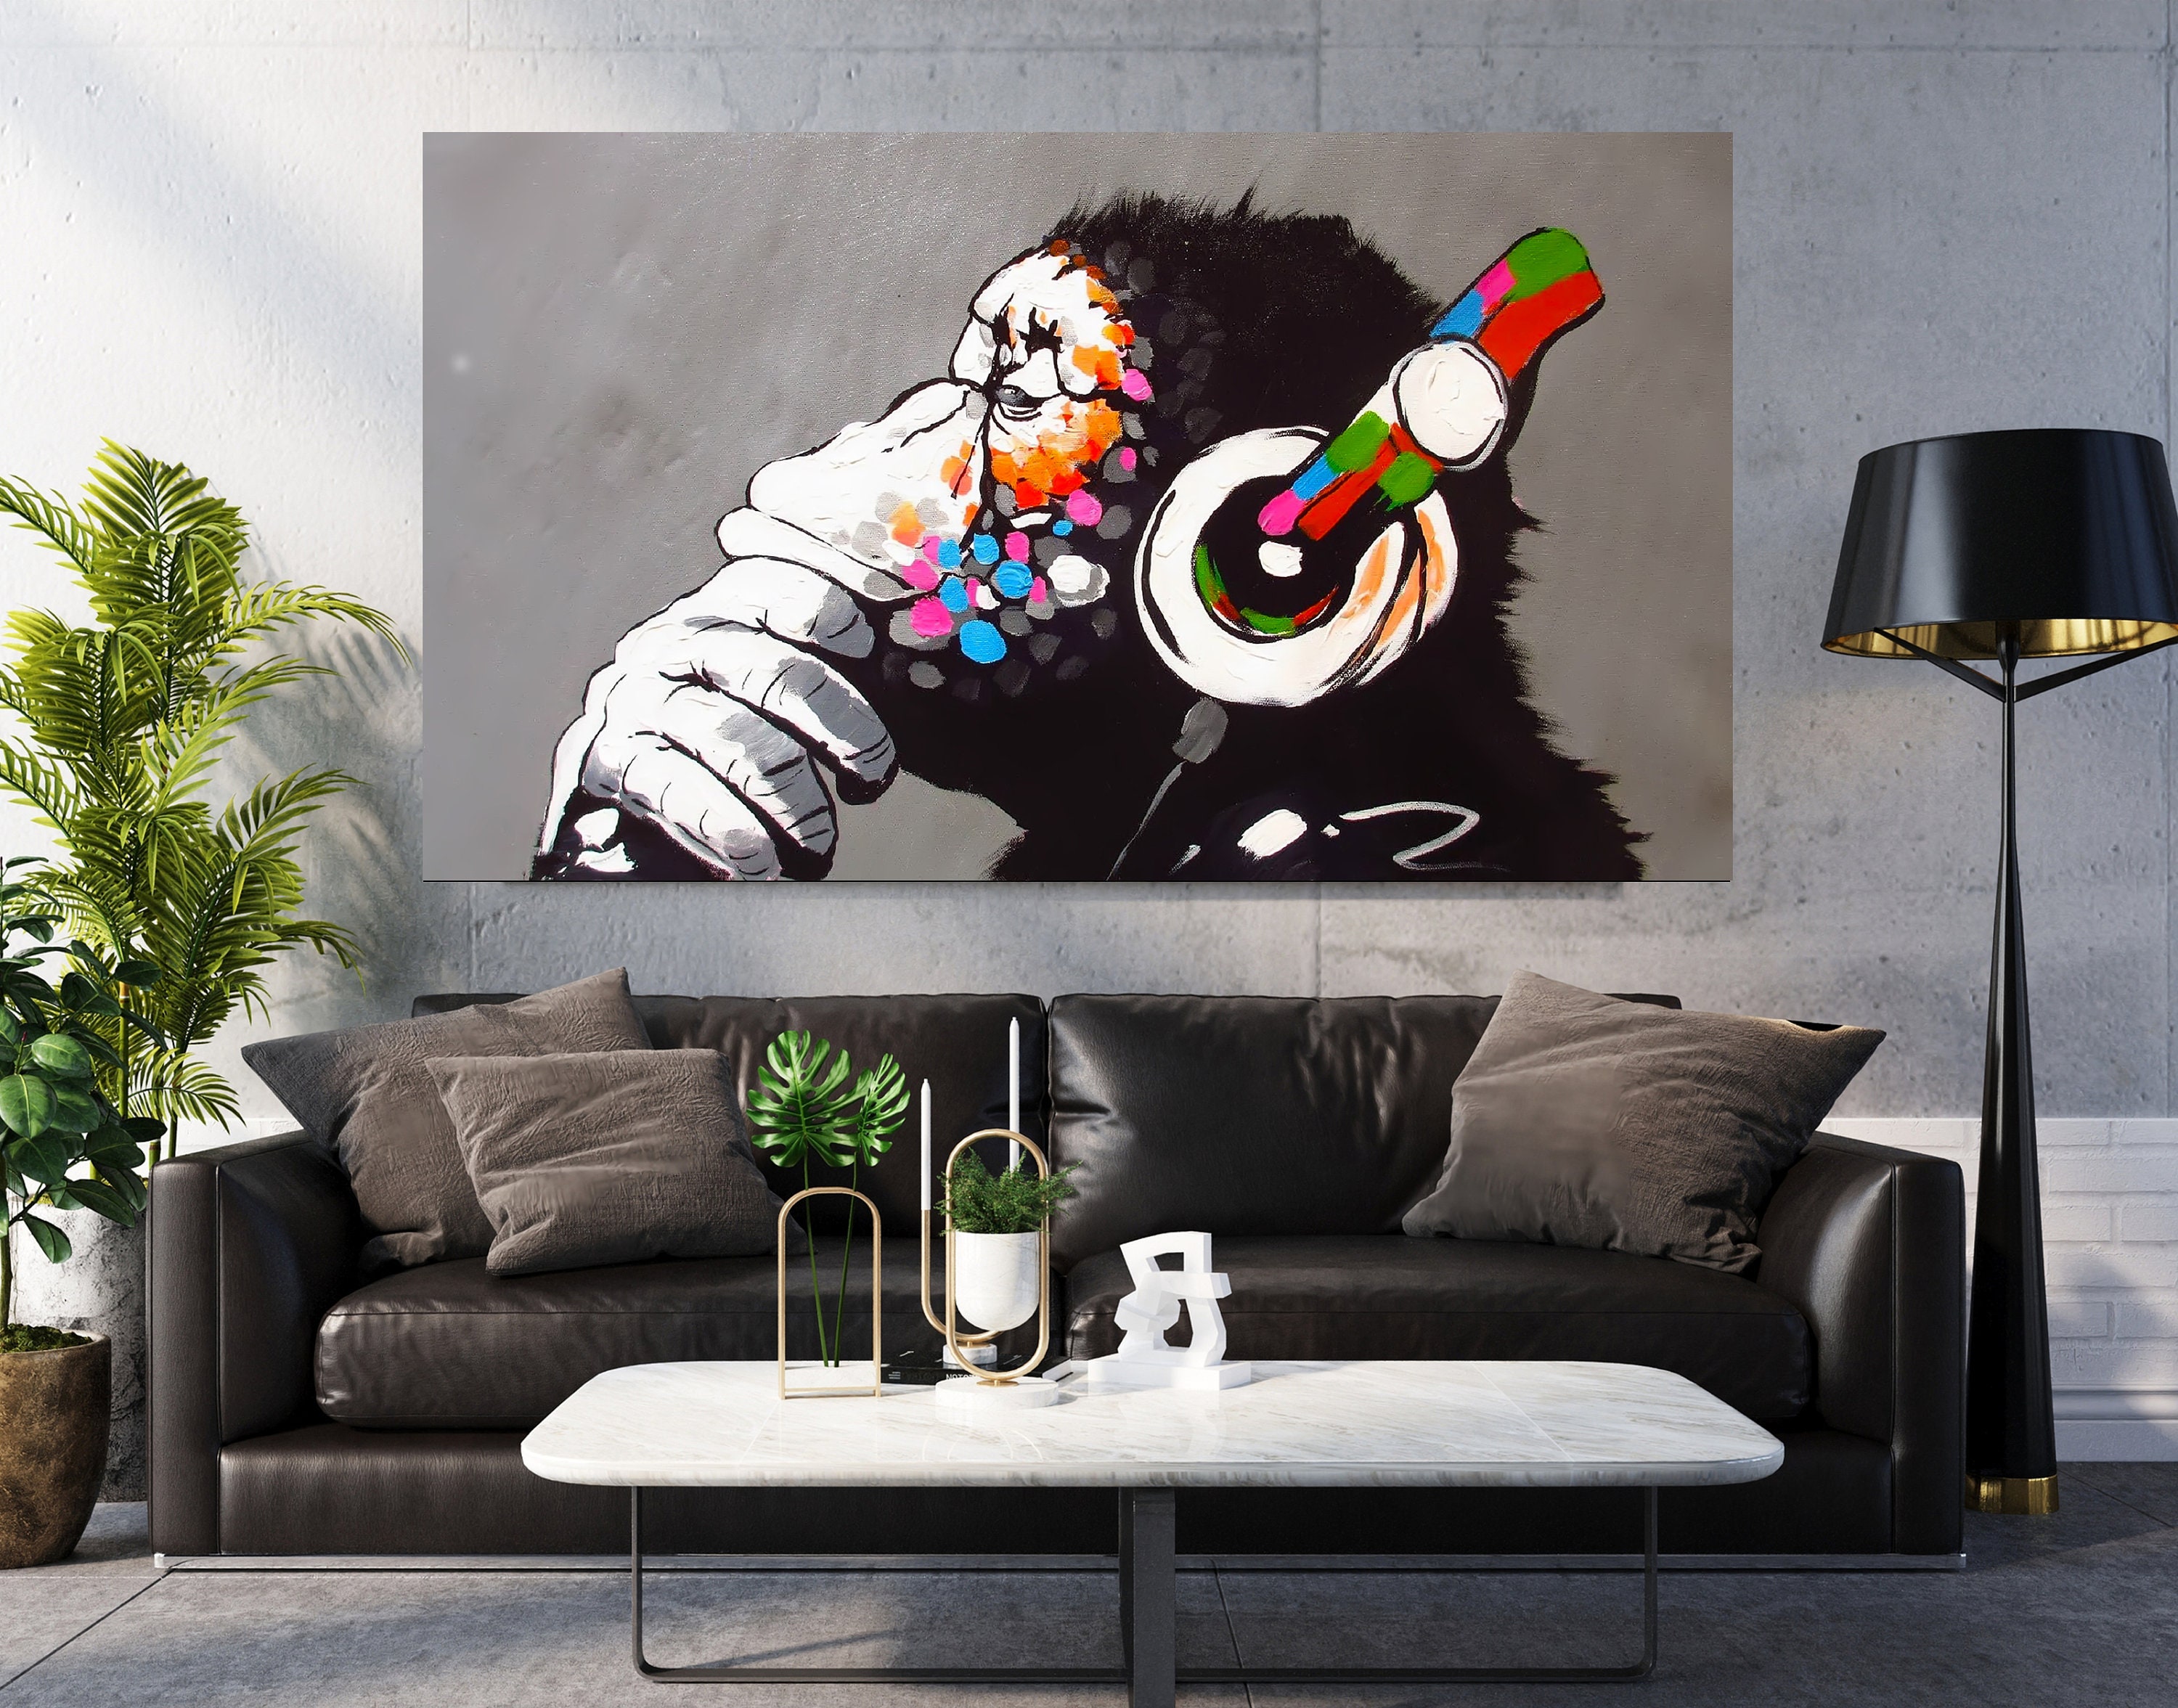  Monkey Room Wall Pictures Set of 4 Banksy Pop Art Paintings  12x12inch Canvas Funny Gorilla Animal Wall Art Modern Artwork Home Decor  for Living Room Art Work for Home Walls Framed